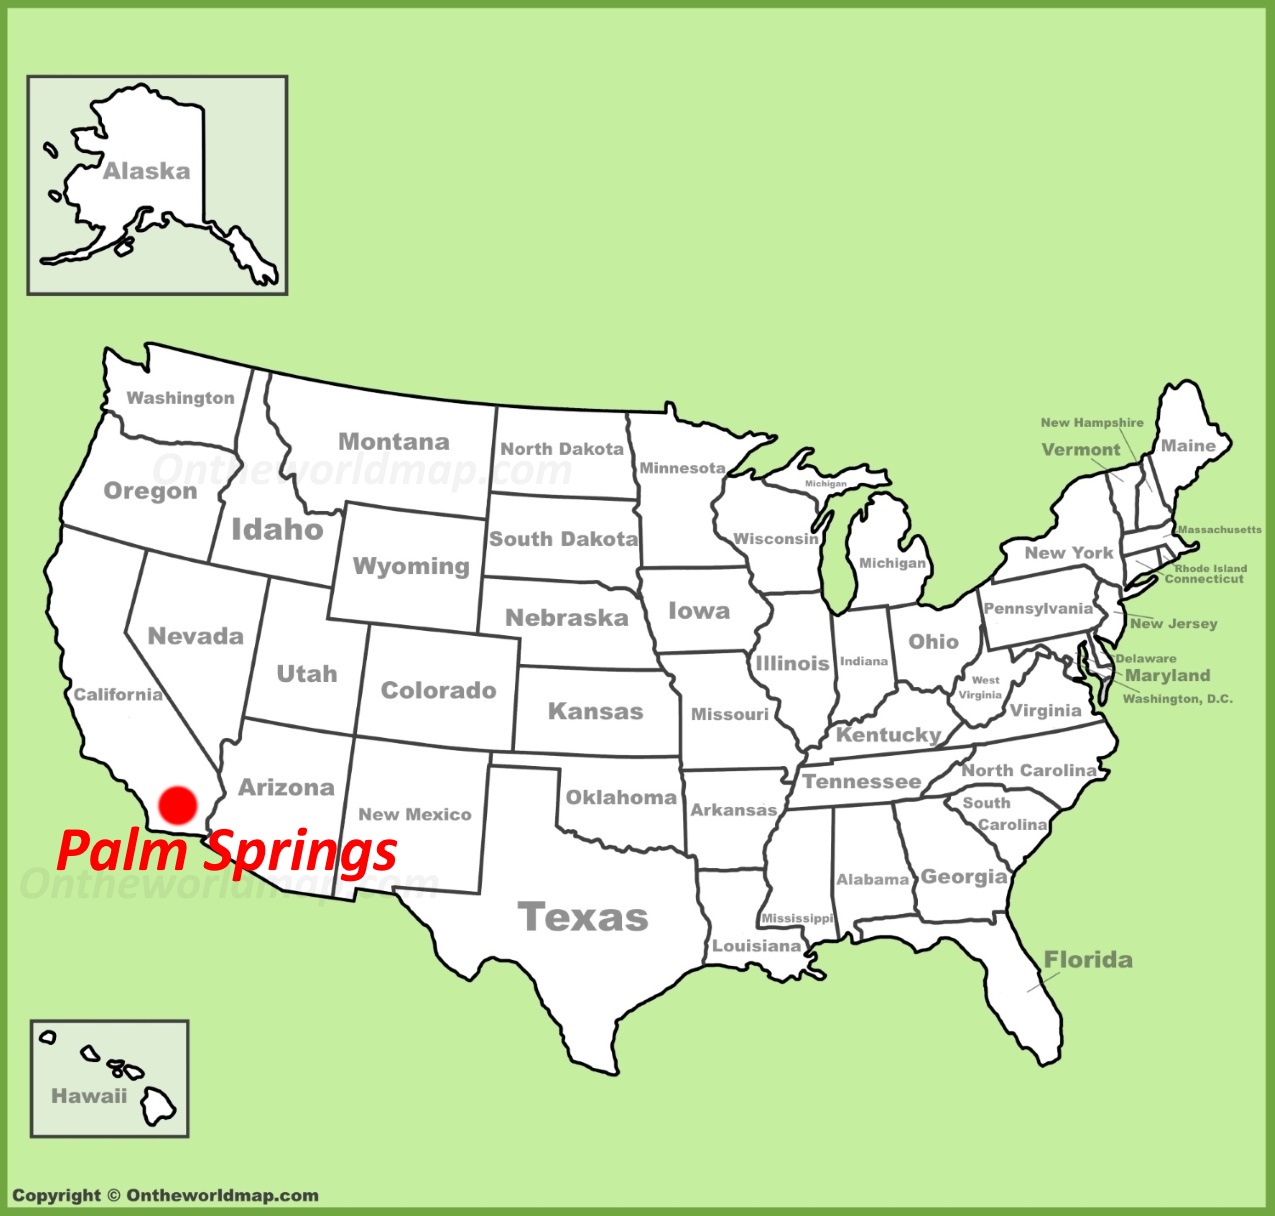 Palm Springs location on the U.S. Map